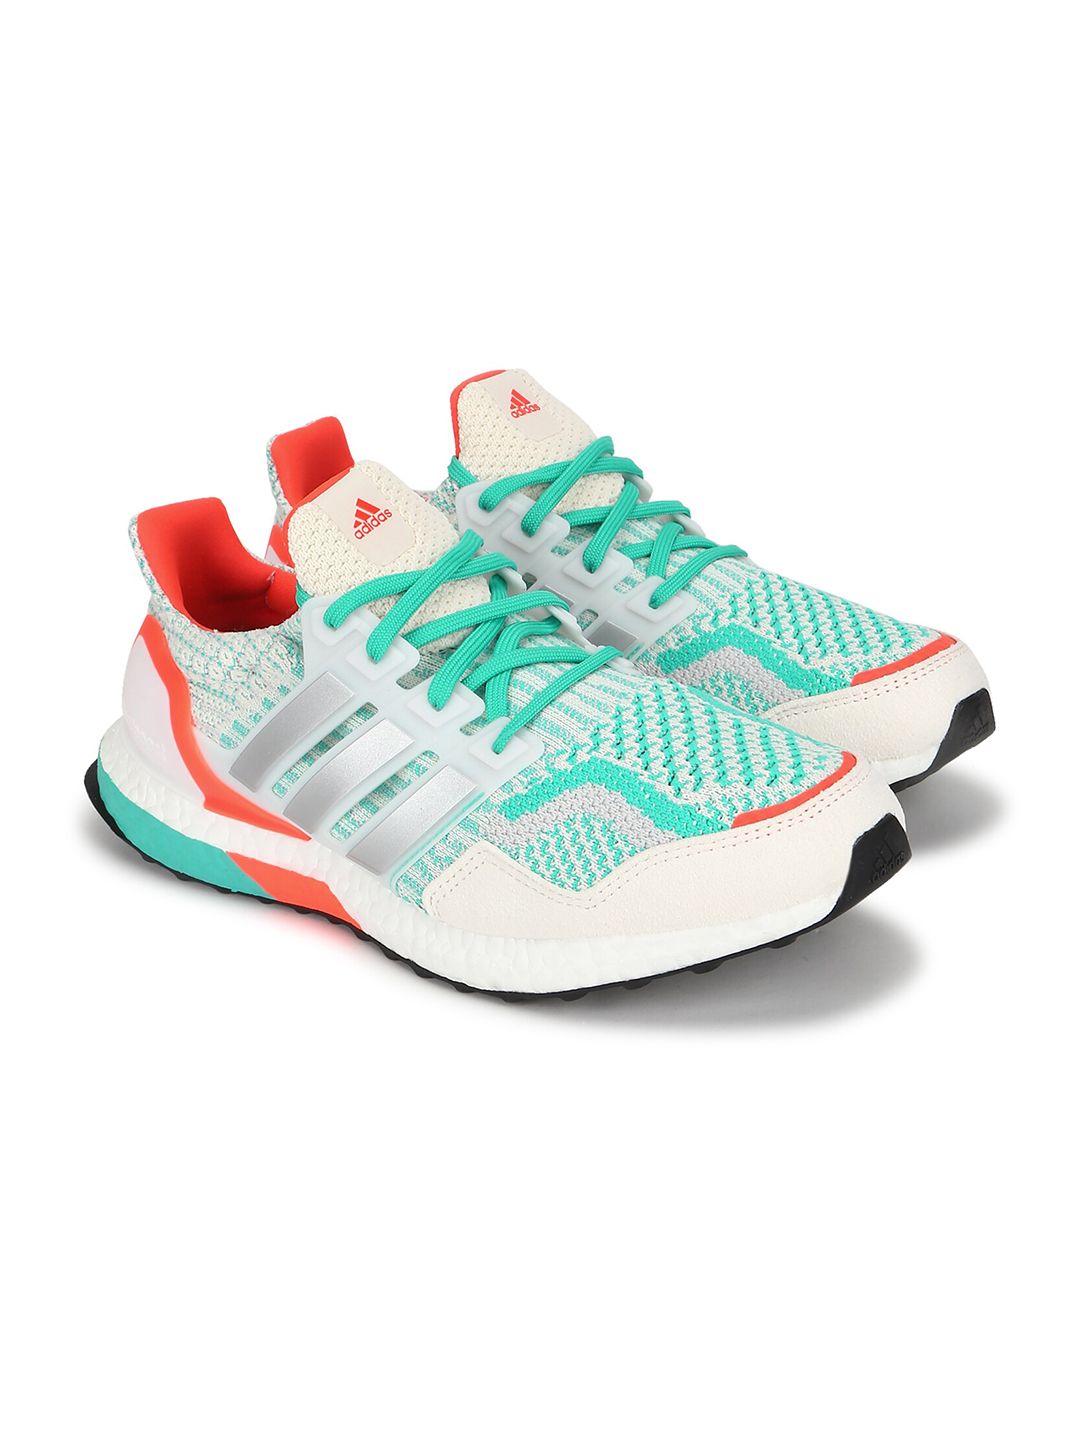 ADIDAS Unisex White Textile Sustainable Running Shoes Price in India